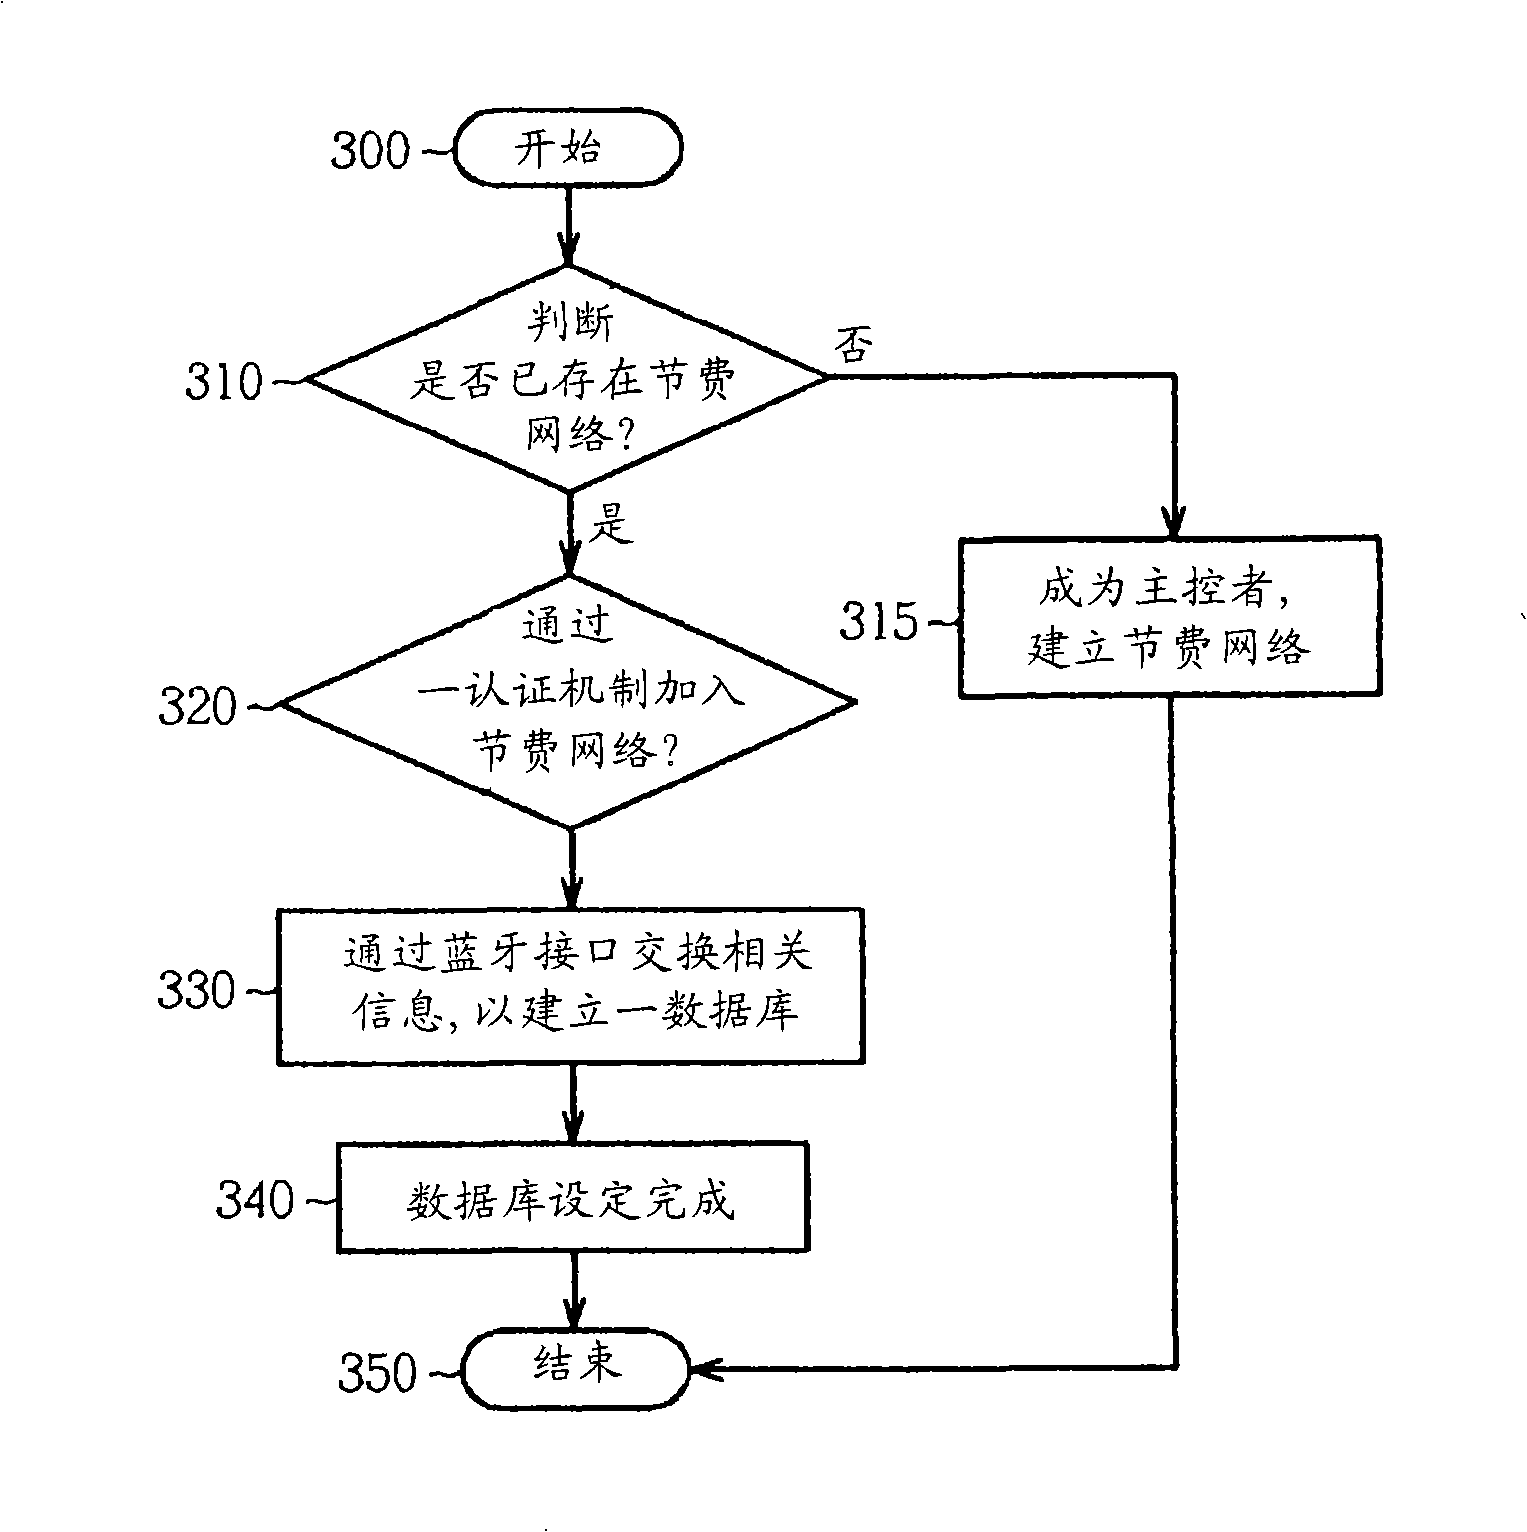 Method for saving call charge through wireless communication interface of mobile communication apparatus